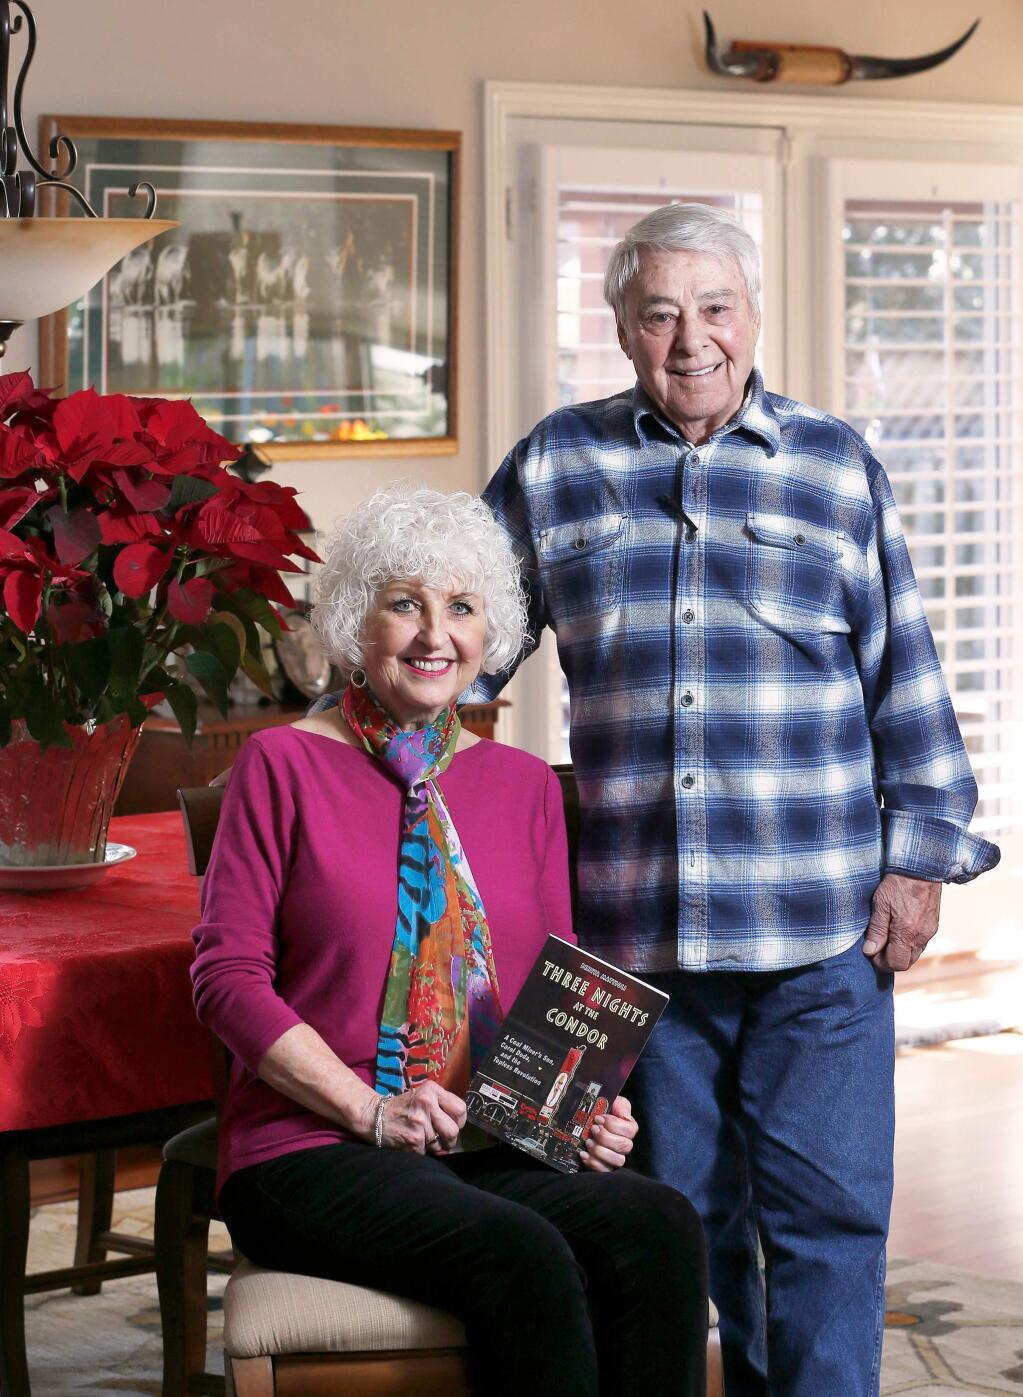 Benita and Pete Mattioli at their home in Santa Rosa on Friday, Jan. 3, 2020. Benita Mattioli wrote the book 'Three Nights at the Condor' based on Pete's ownership of the Condor Club during the 1960s and 1970s in San Francisco. (Alvin Jornada / The Press Democrat)